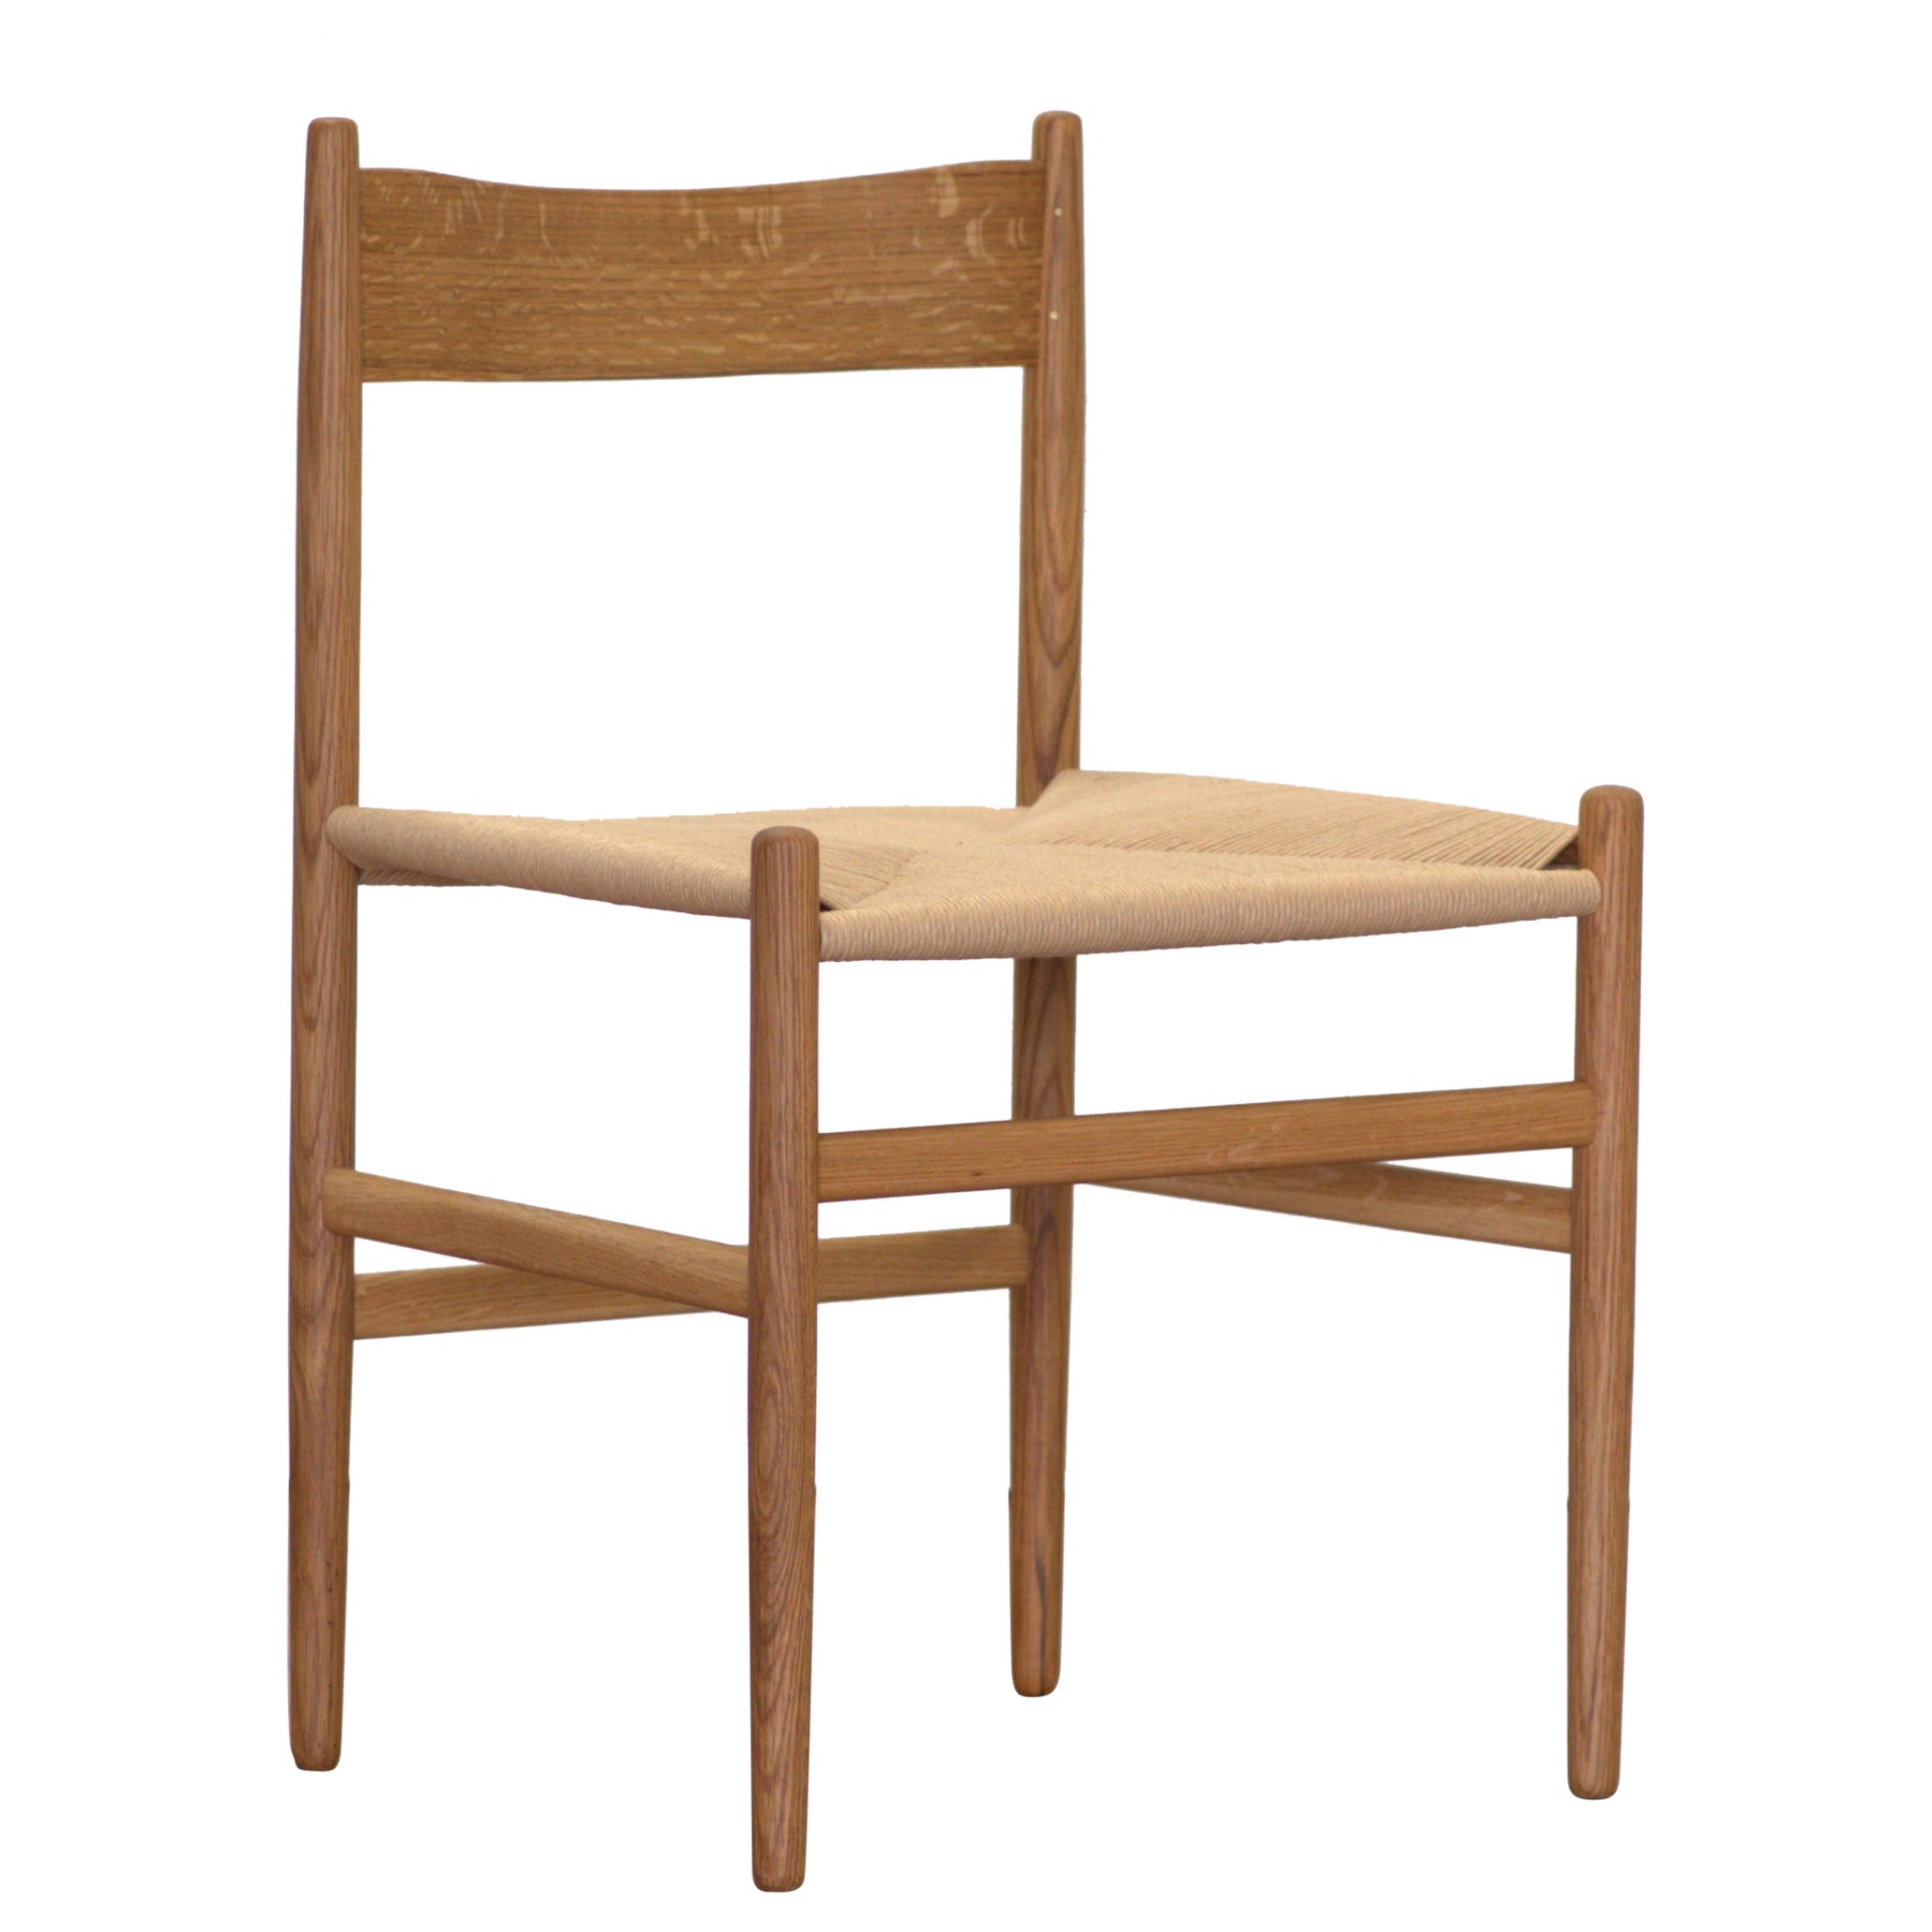 "FF01" Dining Chair w Paper cord Seat by Stokes Furniture